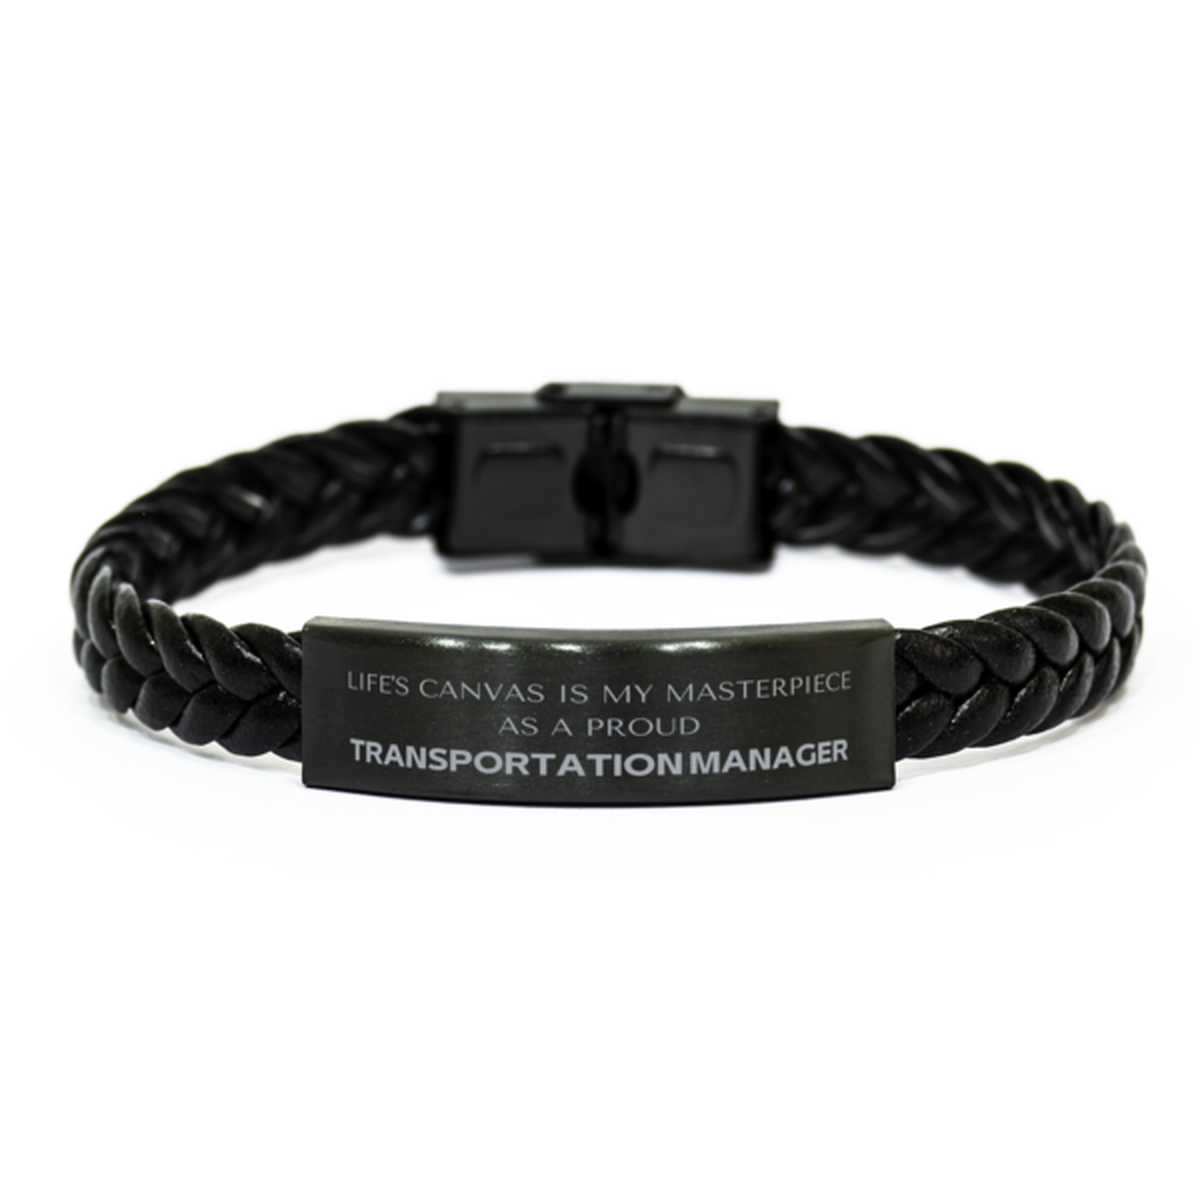 Proud Transportation Manager Gifts, Life's canvas is my masterpiece, Epic Birthday Christmas Unique Braided Leather Bracelet For Transportation Manager, Coworkers, Men, Women, Friends